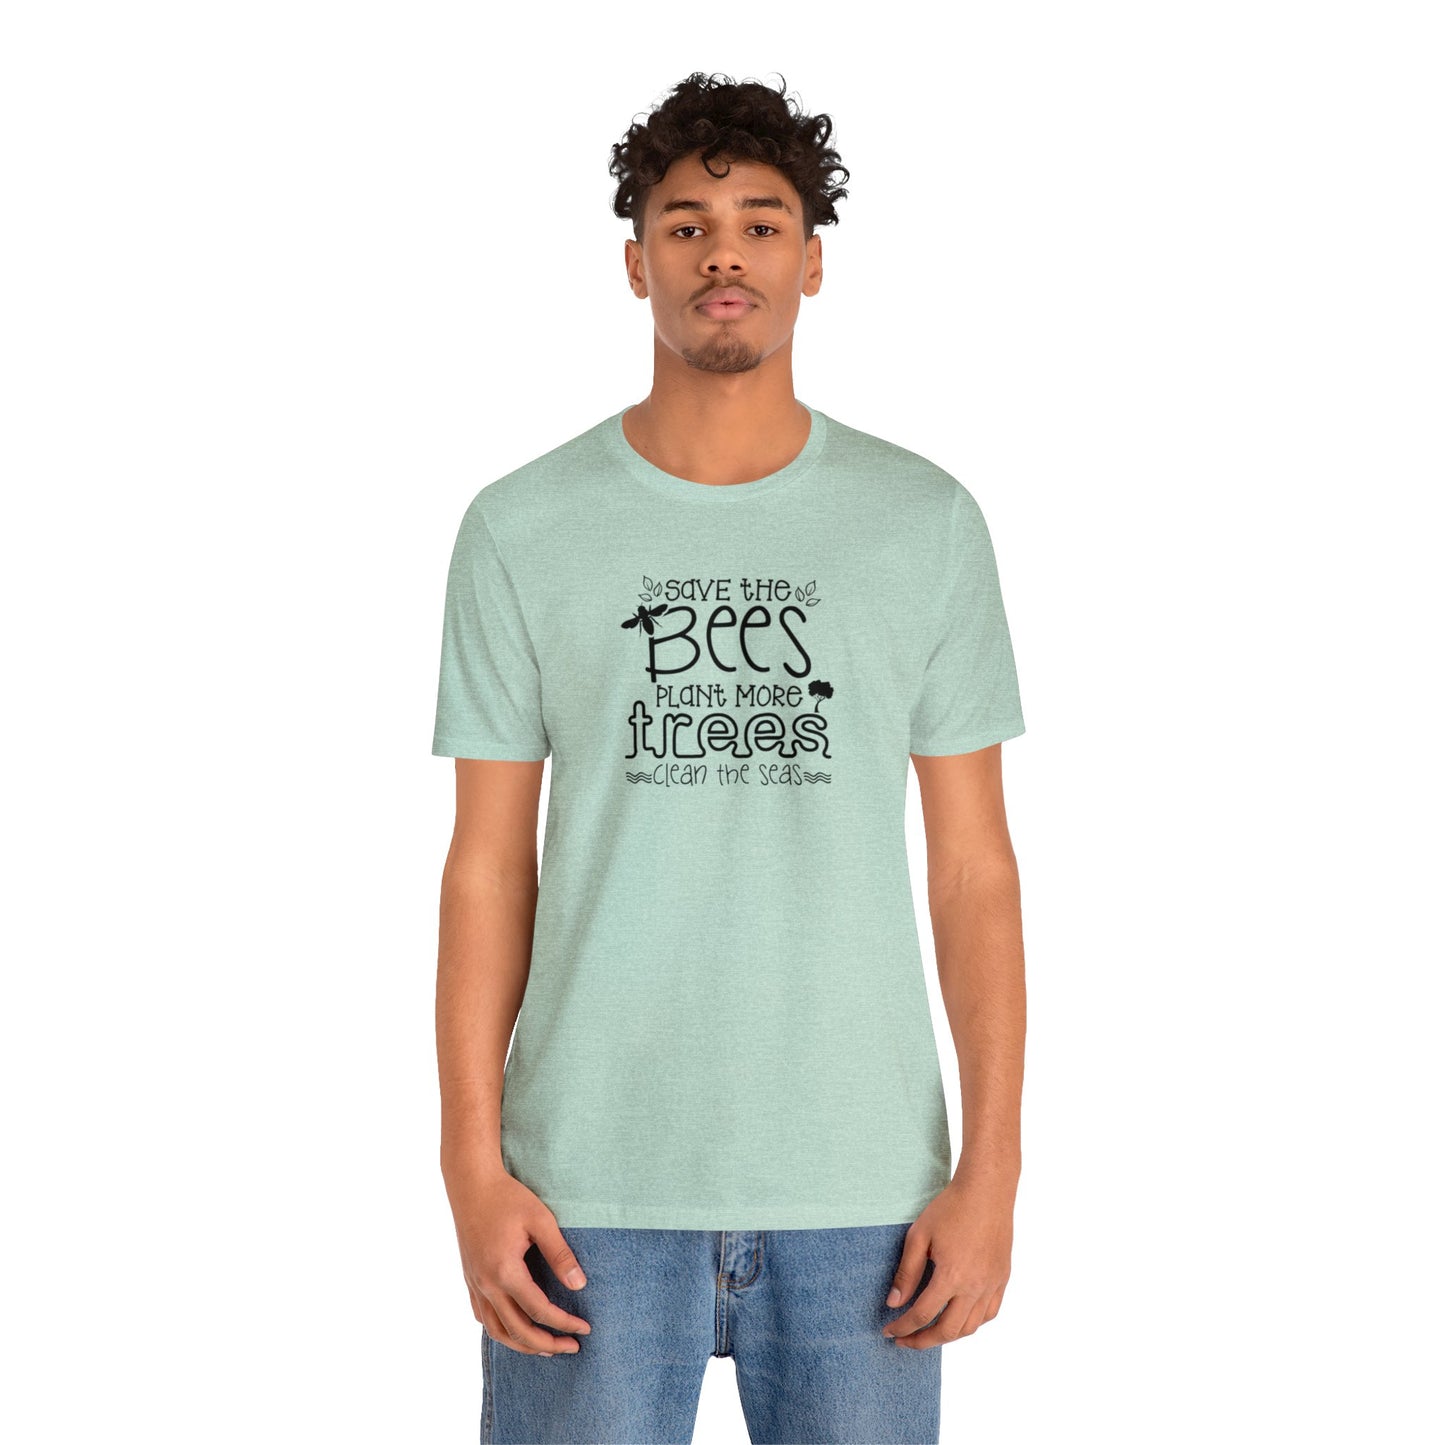 Save The Bees, Plant More Trees, Clean The Seas Unisex Jersey Short Sleeve Tee